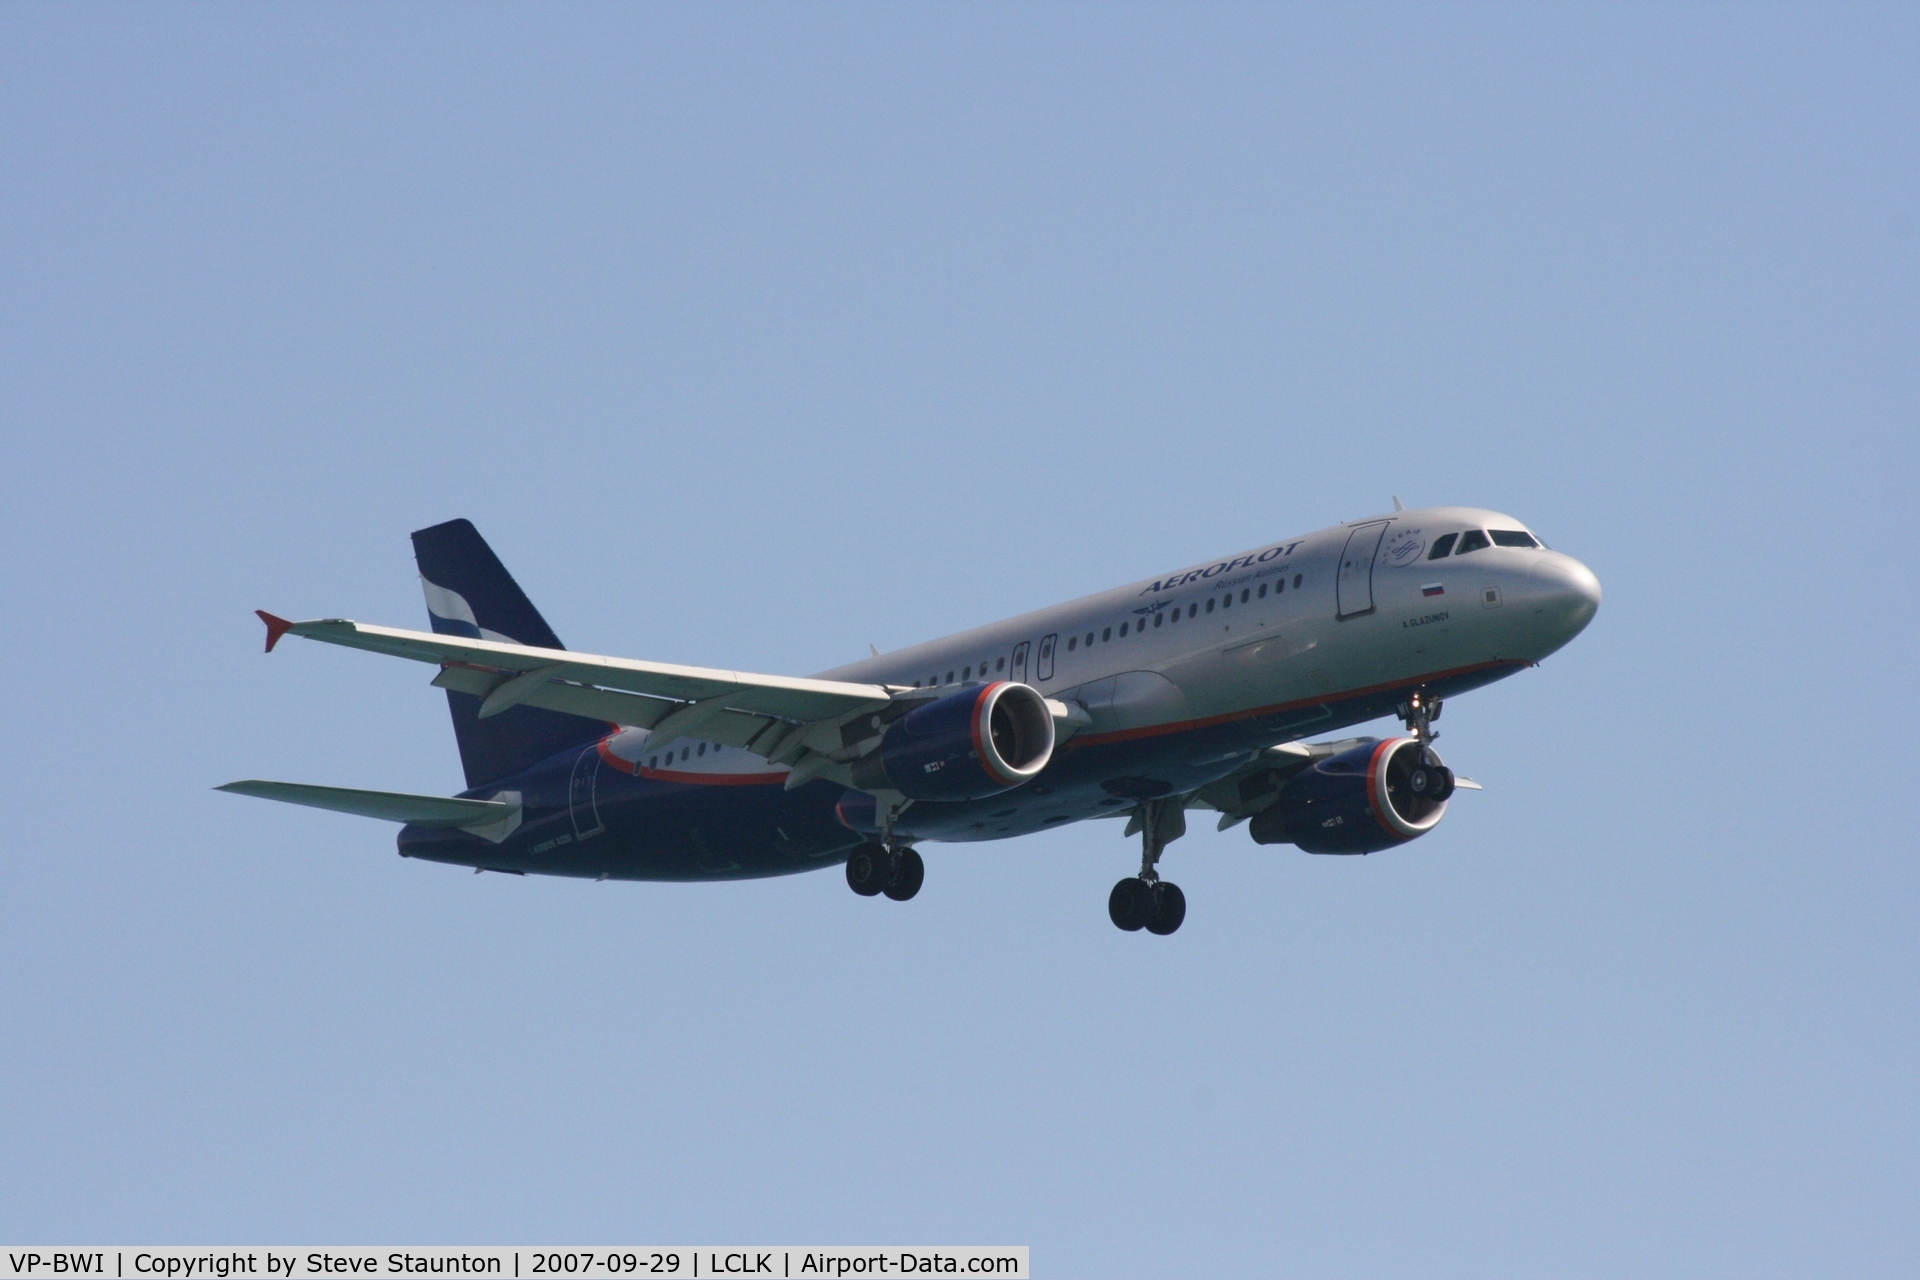 VP-BWI, 2004 Airbus A320-214 C/N 2163, Taken on a beach in Larnaca 29th September 2007